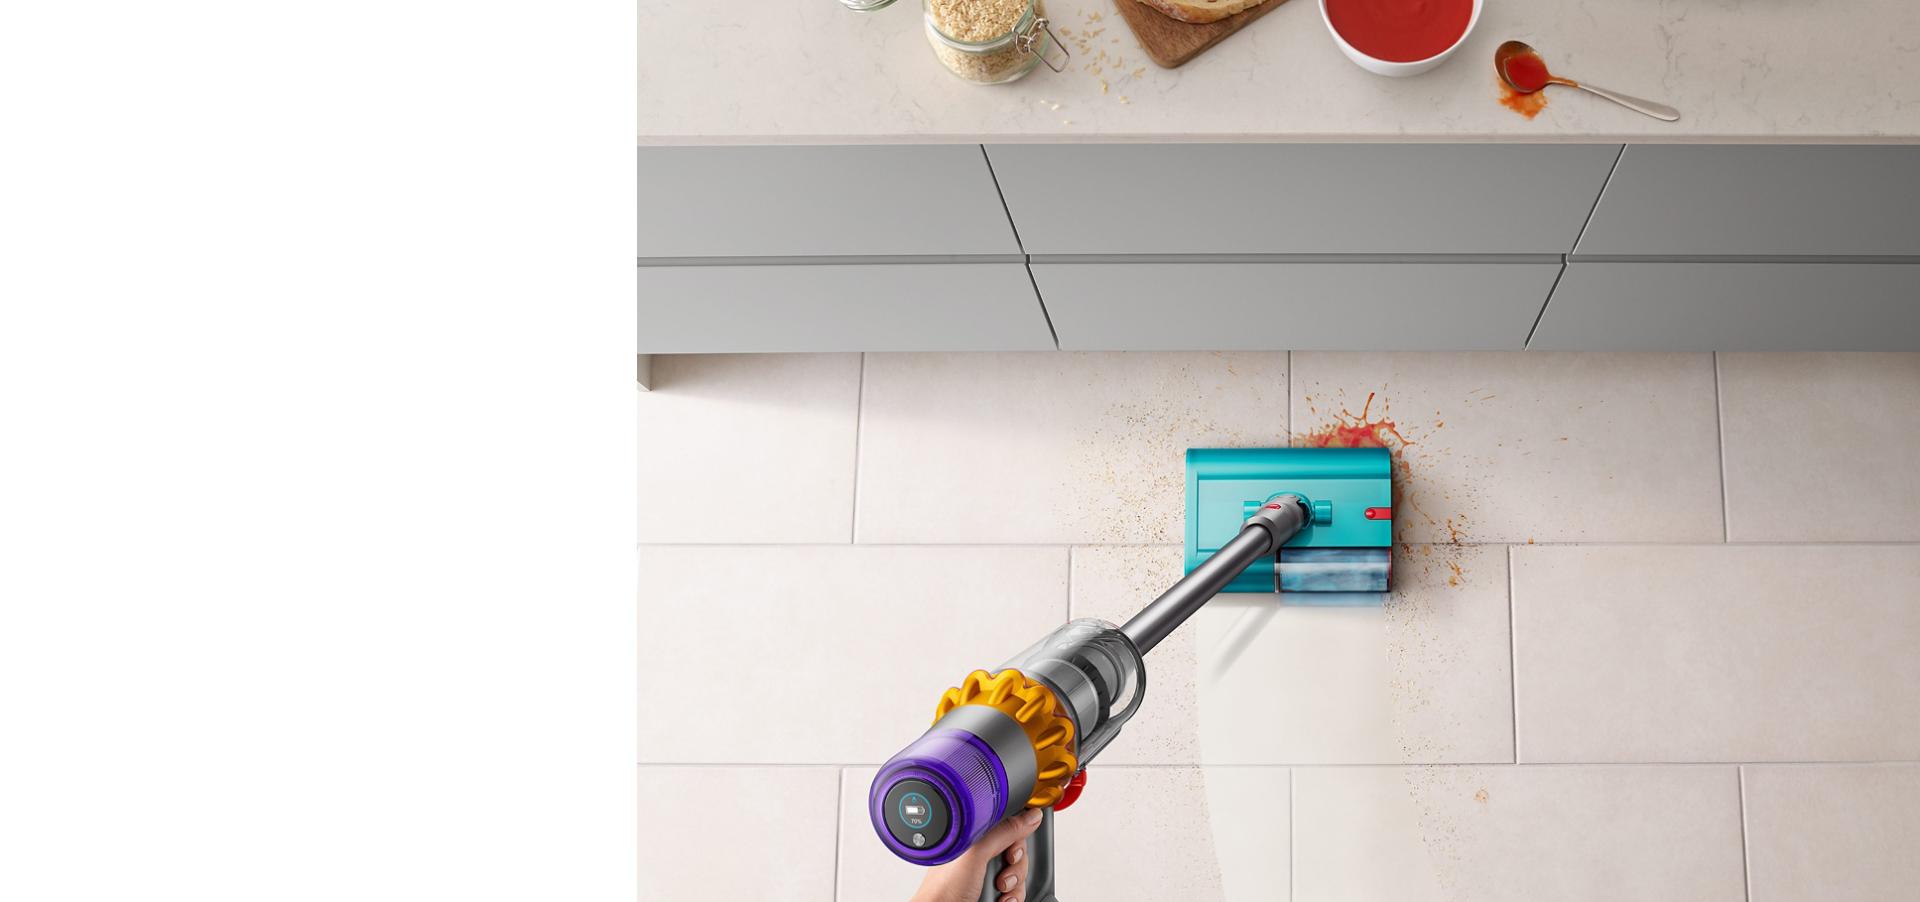 Dyson V15s Detect Submarine wet roller head clearing up spilt soup and breadcrumbs.